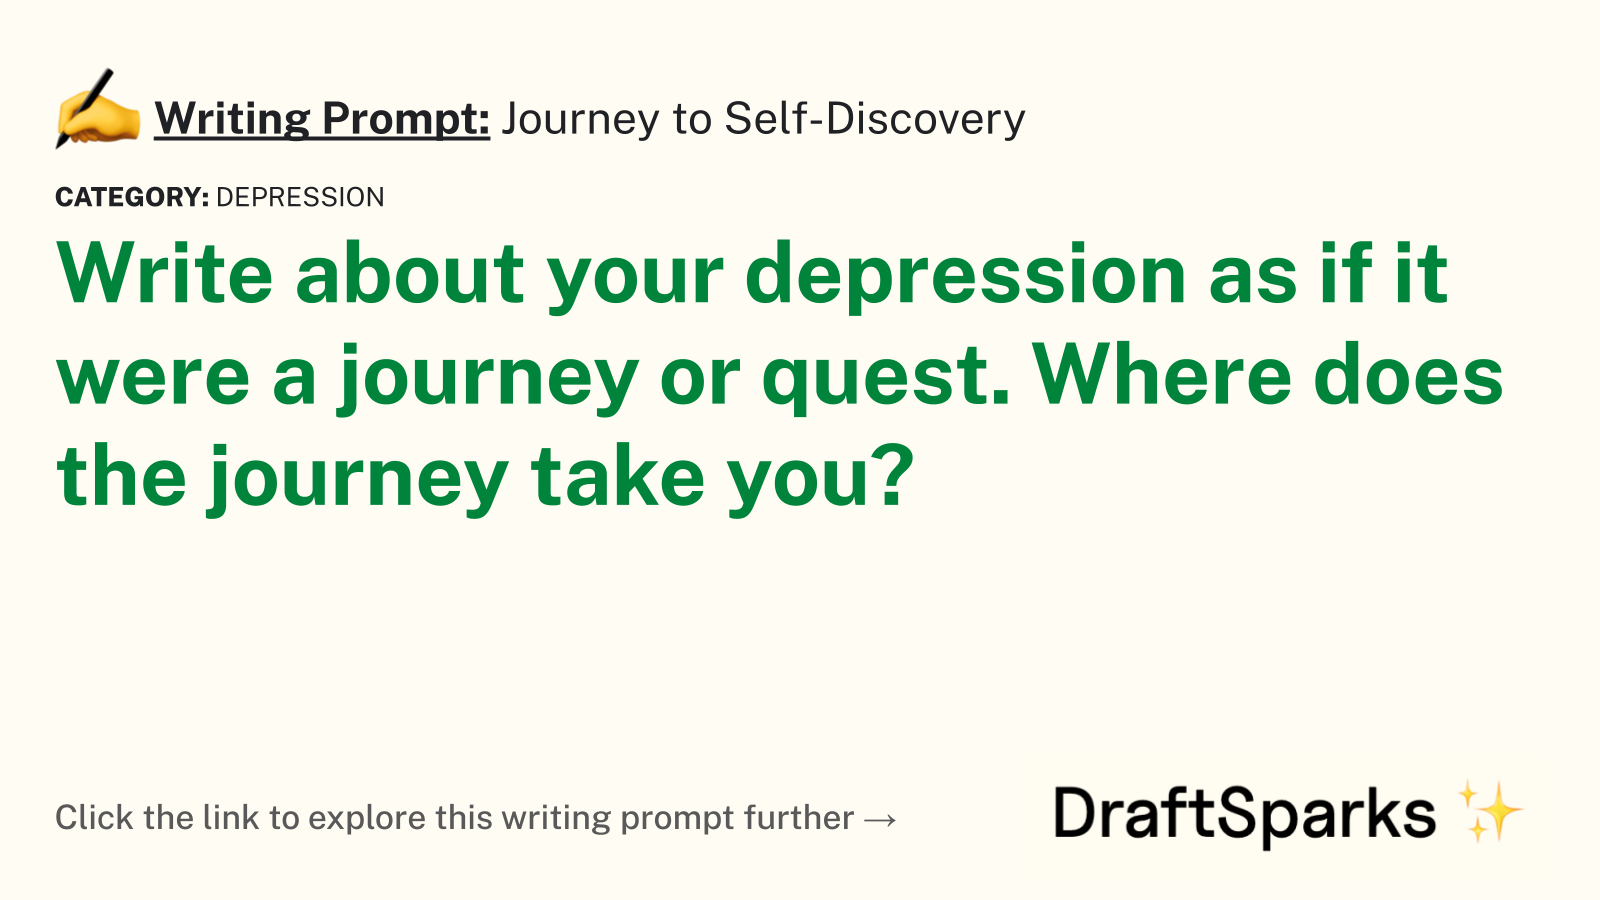 Journey to Self-Discovery